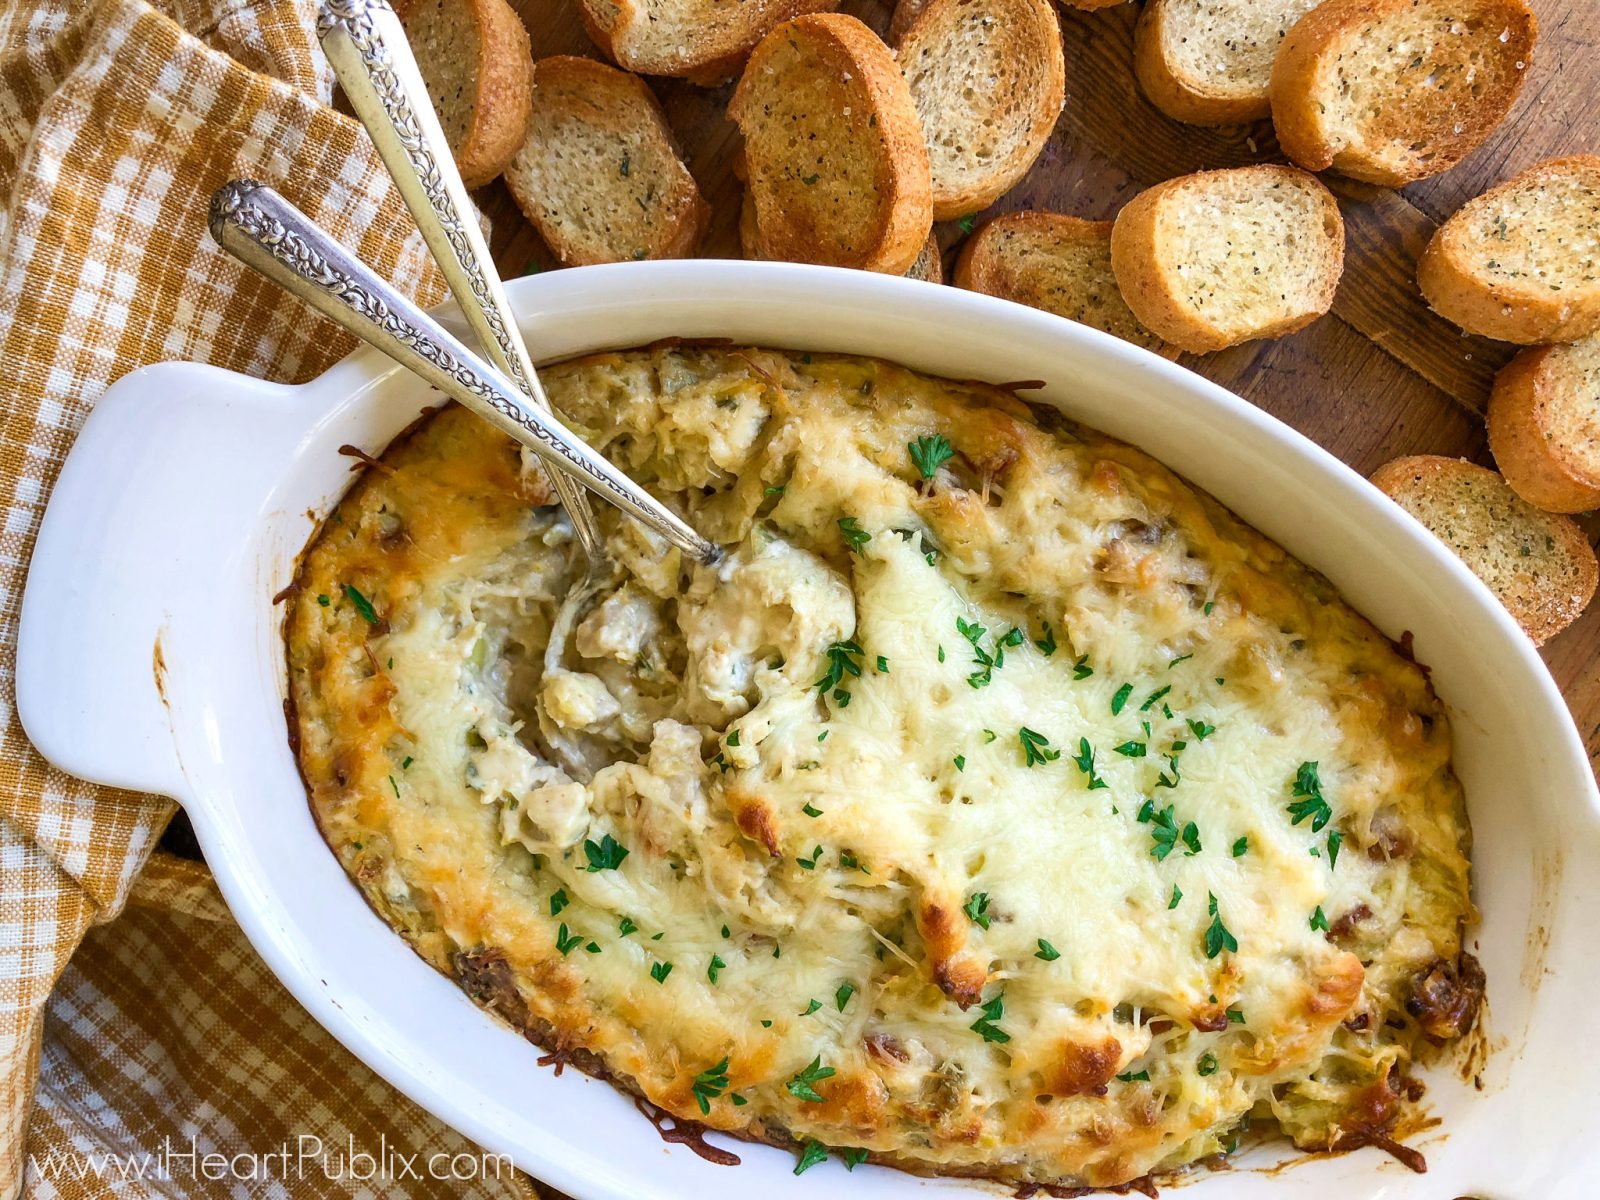 Baked Artichoke & Turkey Dip – Grab A Great Discount On Hellmann’s Mayo To Have For All Your Favorite Meals